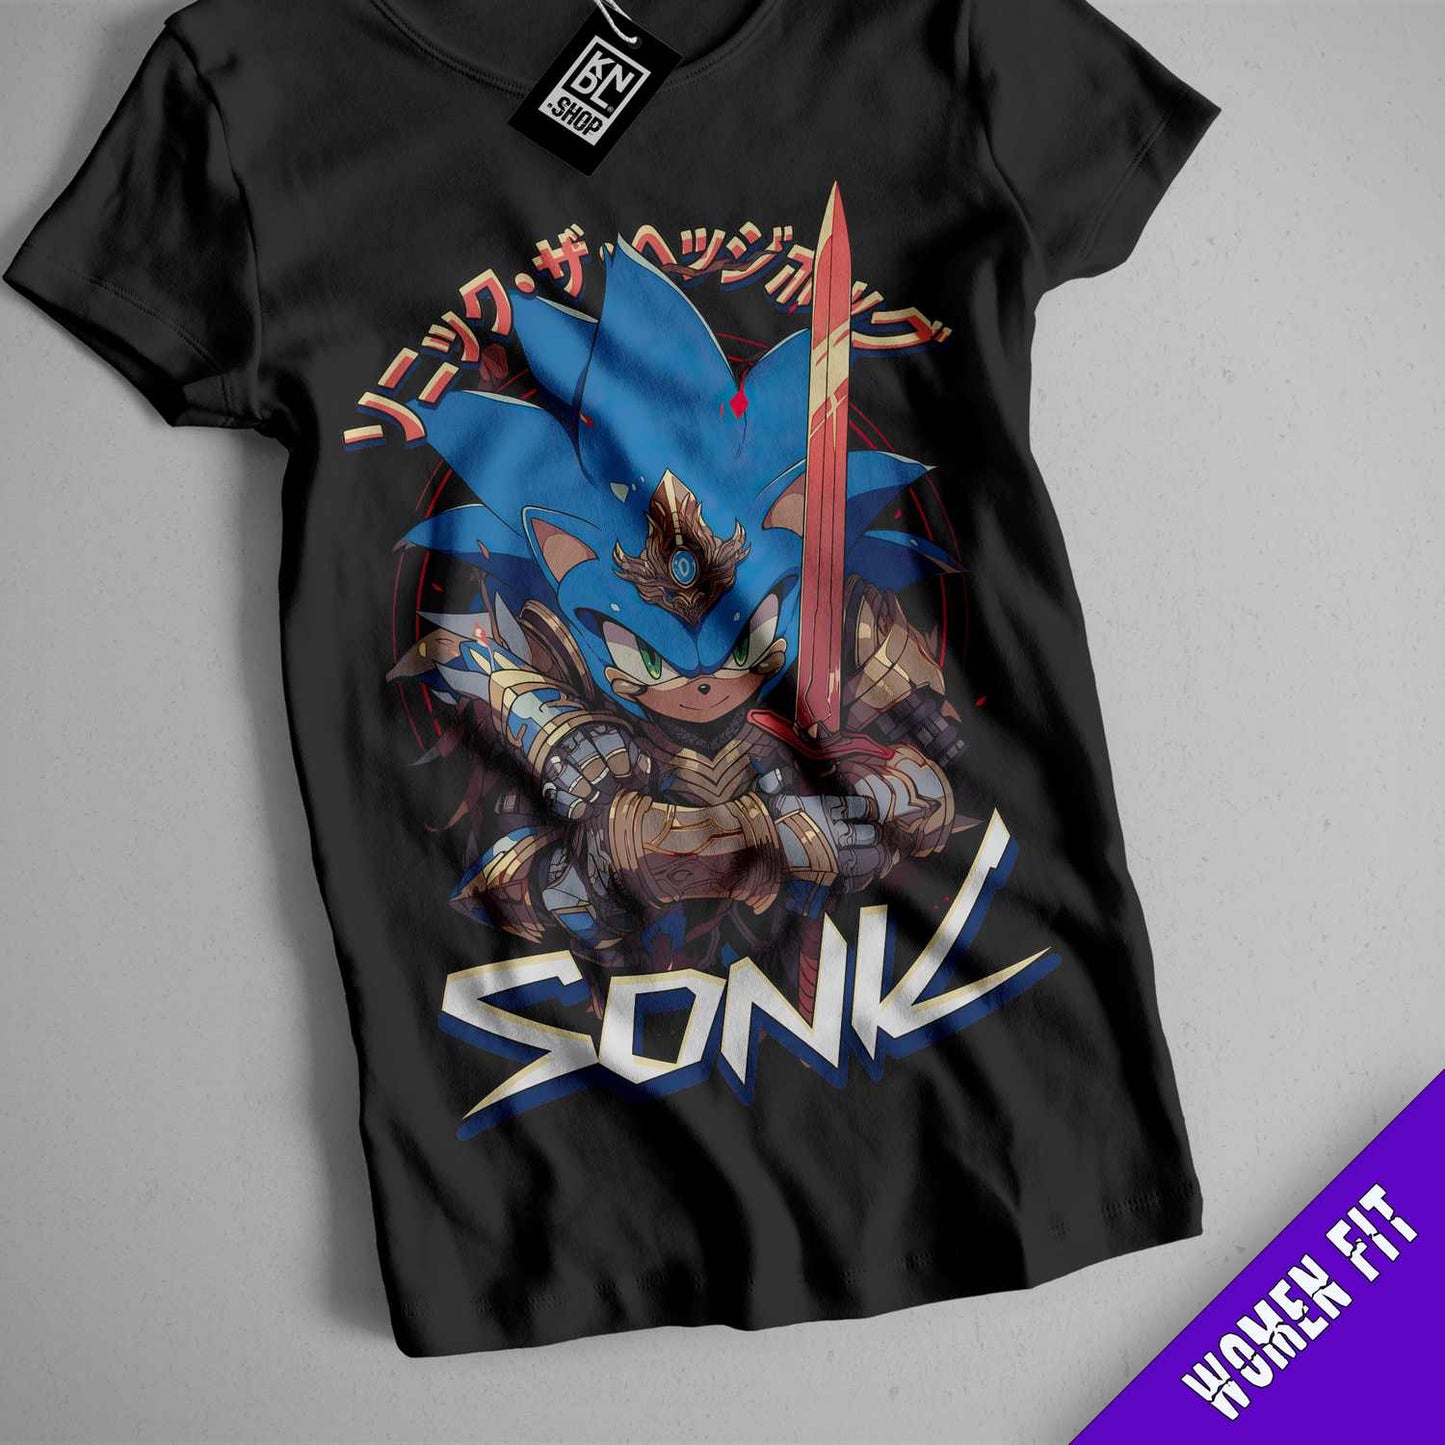 a black shirt with a picture of a sonic character on it